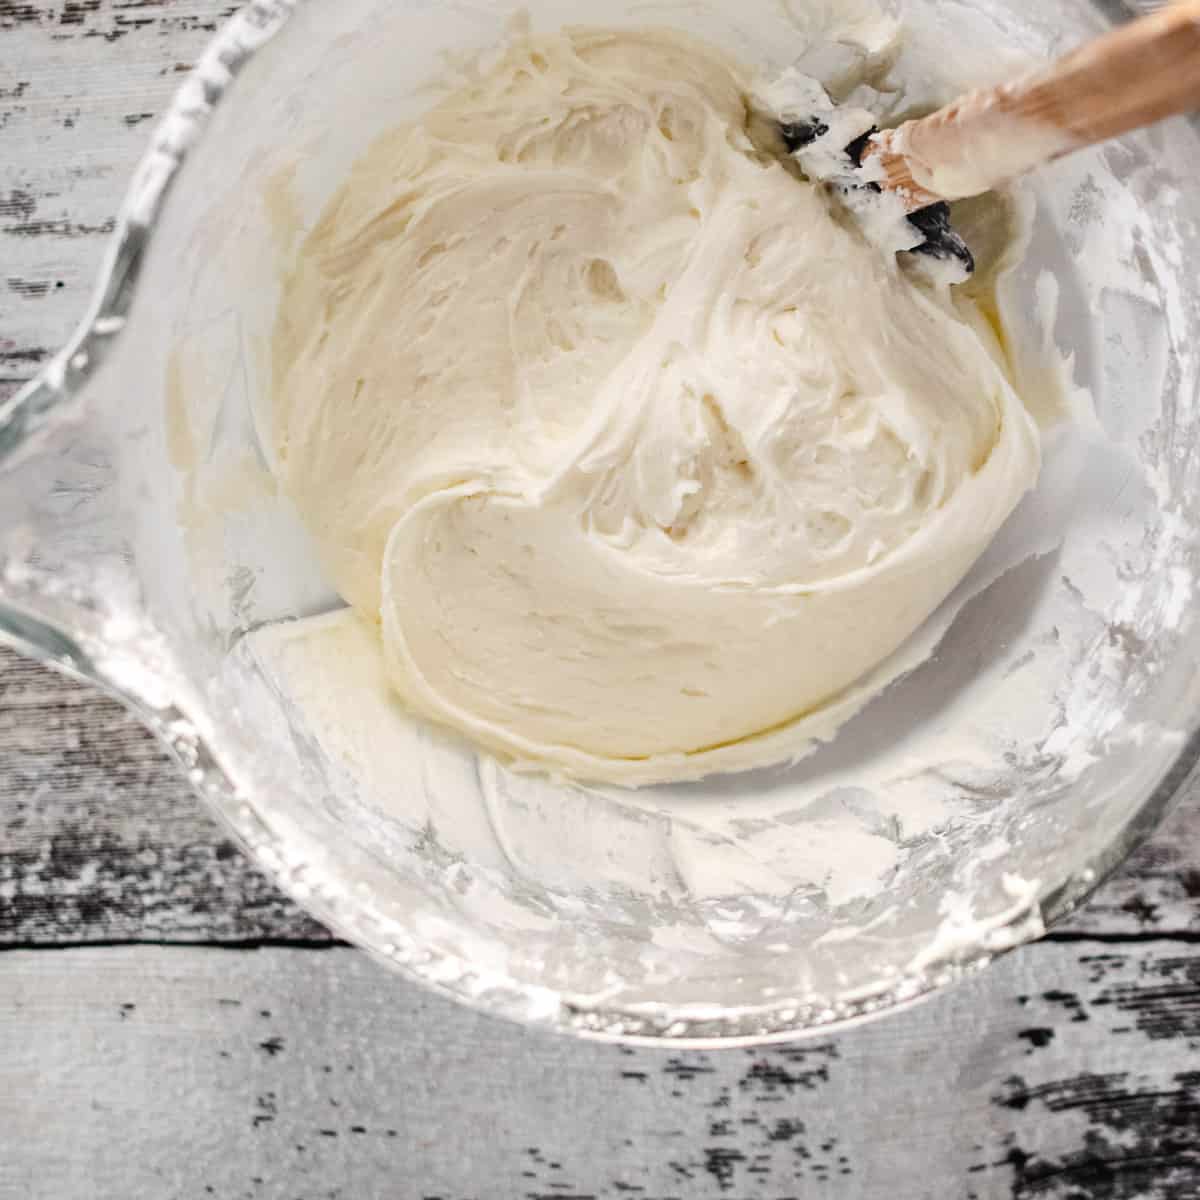 Glass mixing bowl of white buttercream frosting.